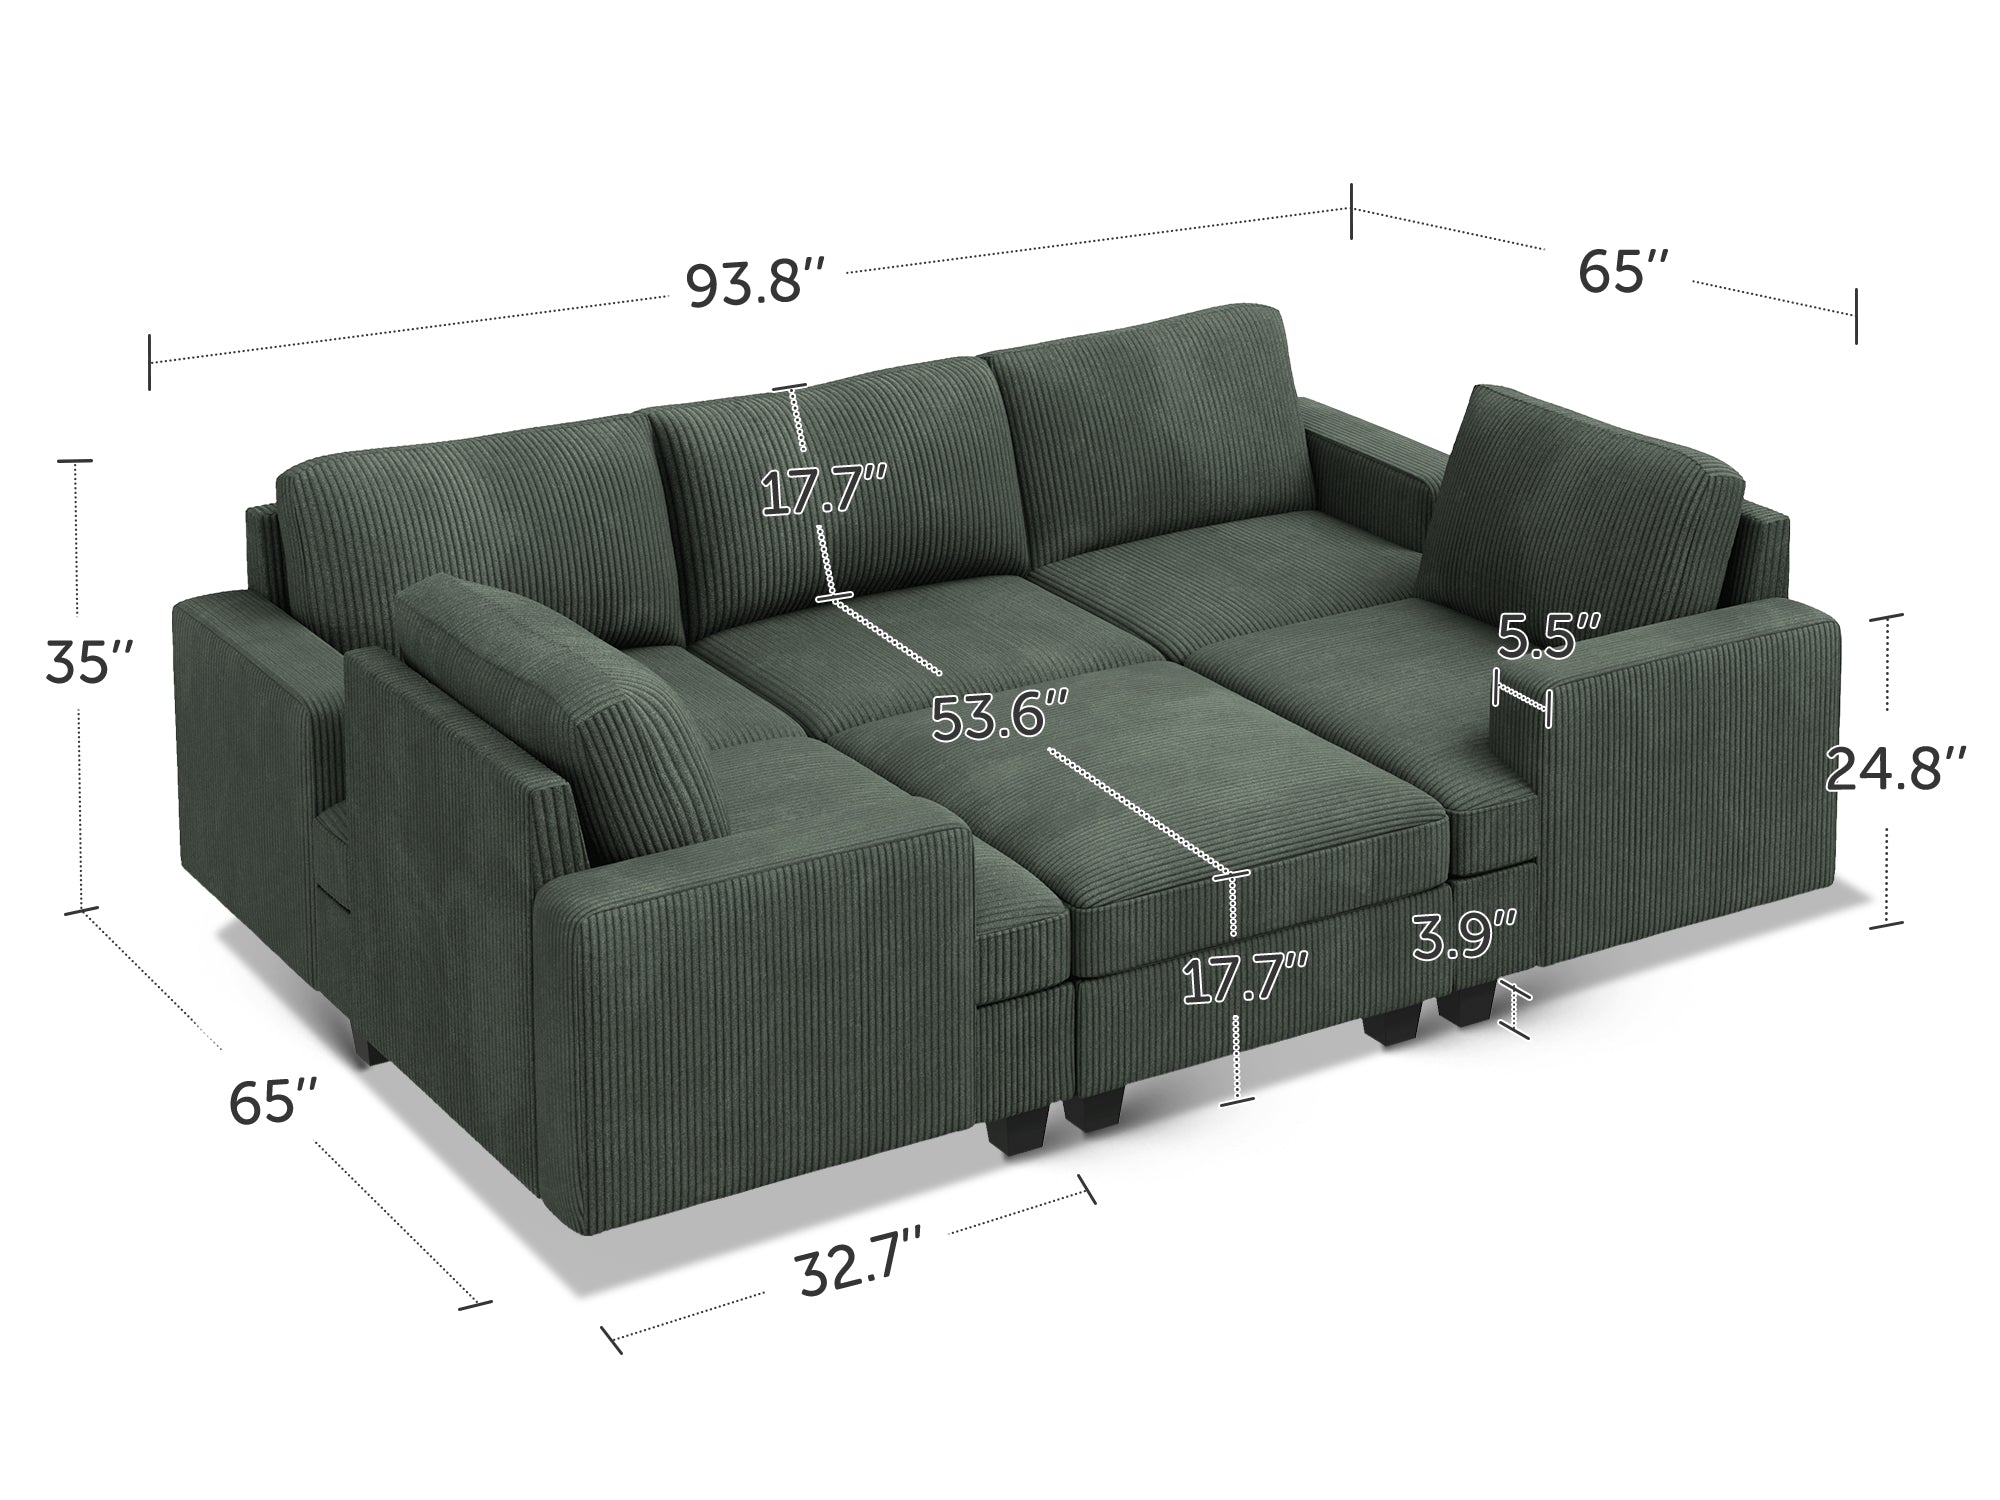 HONBAY 6-Piece Corduroy Modular Sleeper Lindyn Sectional With Storage Space #Color_Corduroy Green